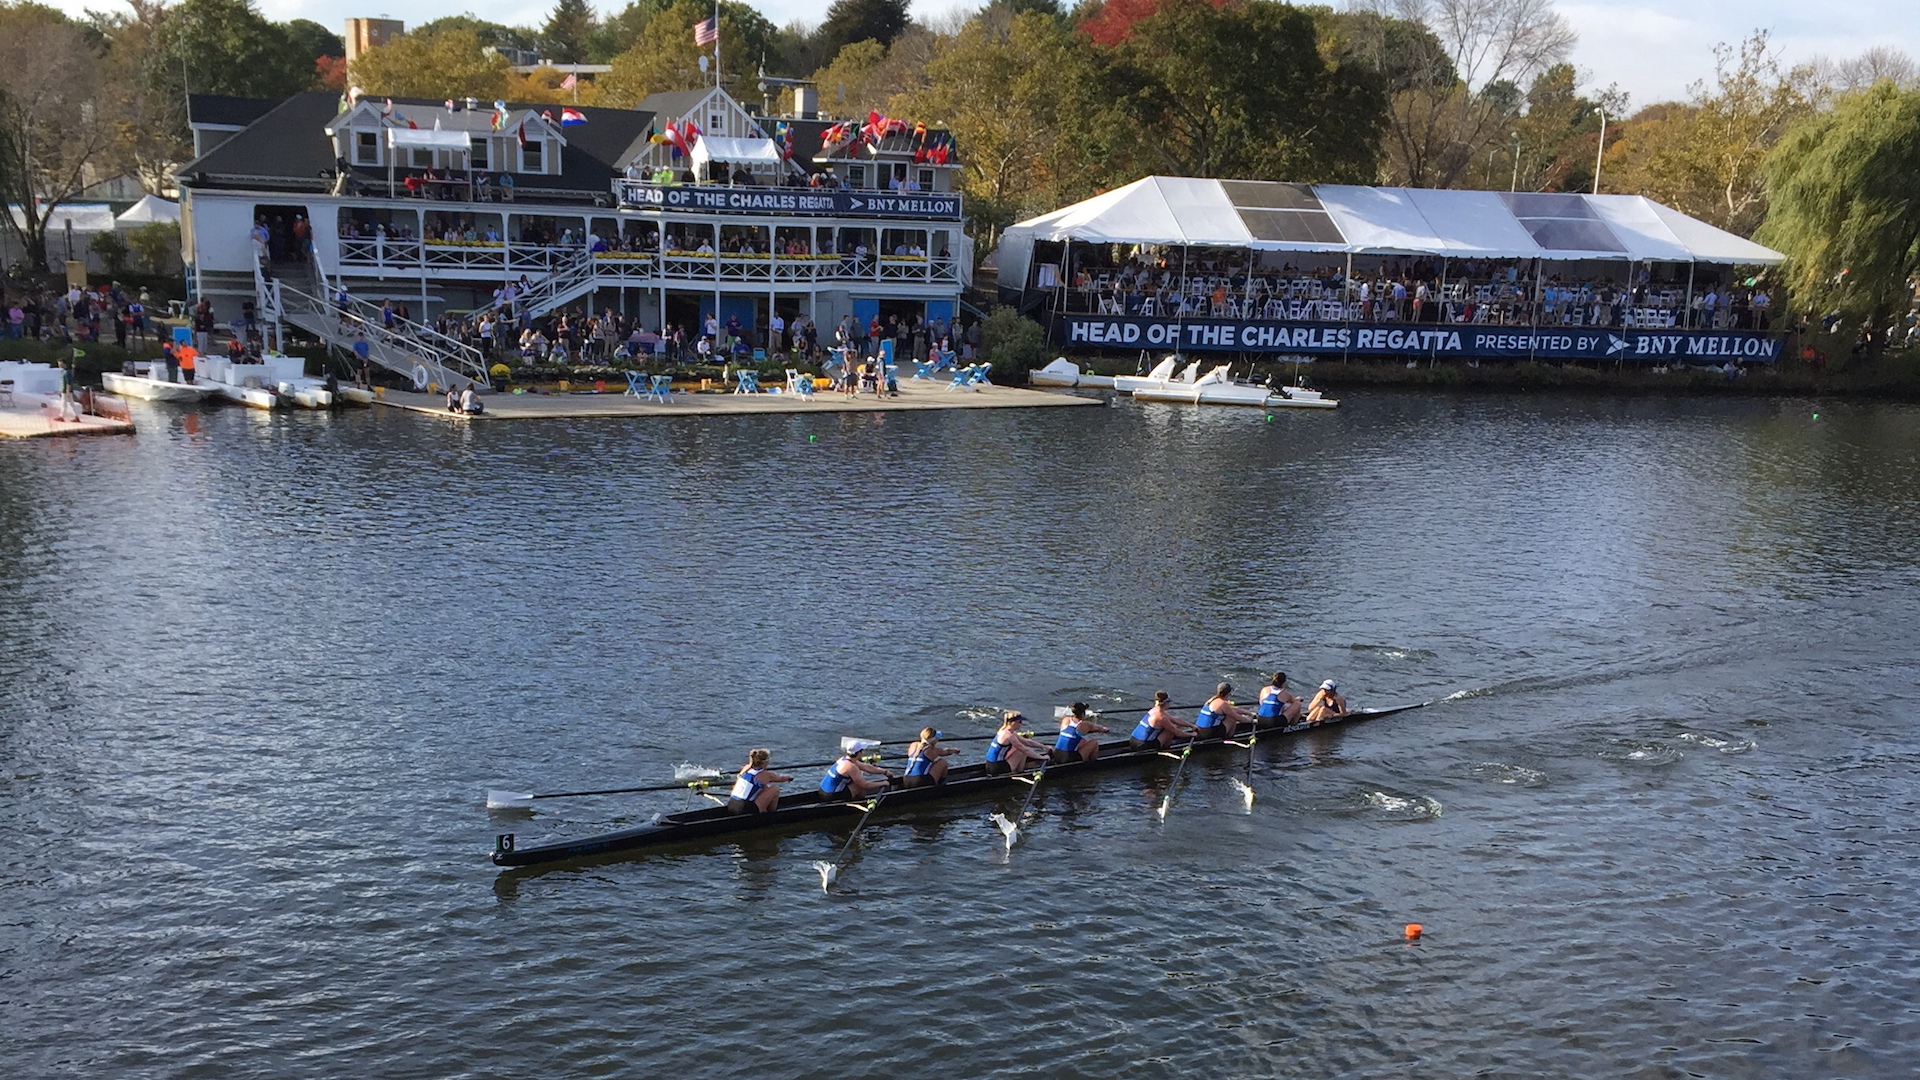 The Blue will have three entries in the Women's Collegiate 8+ on Sunday afternoon.